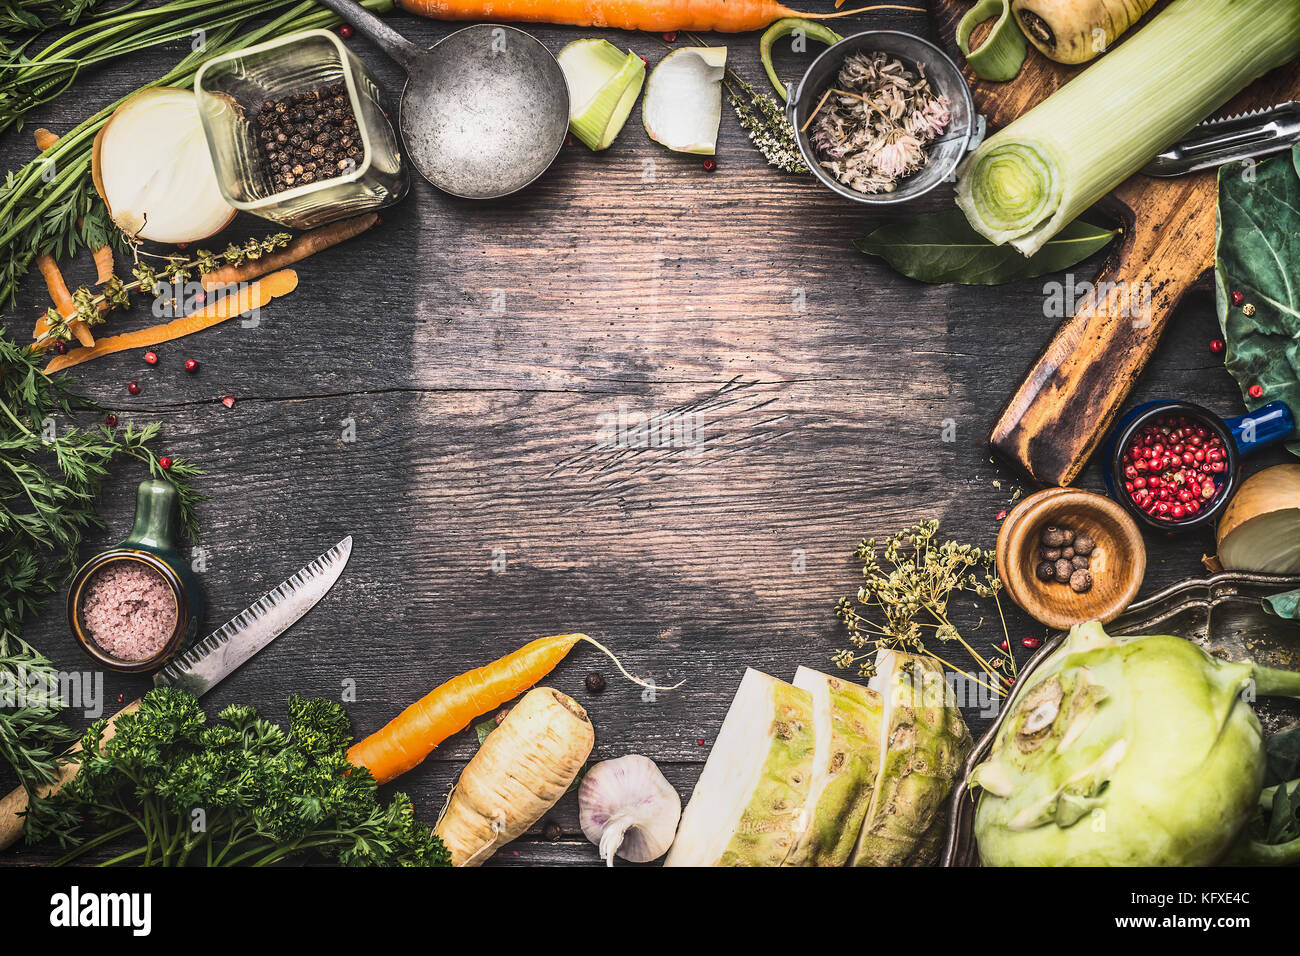 Healthy vegetarian cooking ingredients for soup or stew. Raw organic vegetables with kitchen tools on dark rustic wooden background, top view. Country Stock Photo